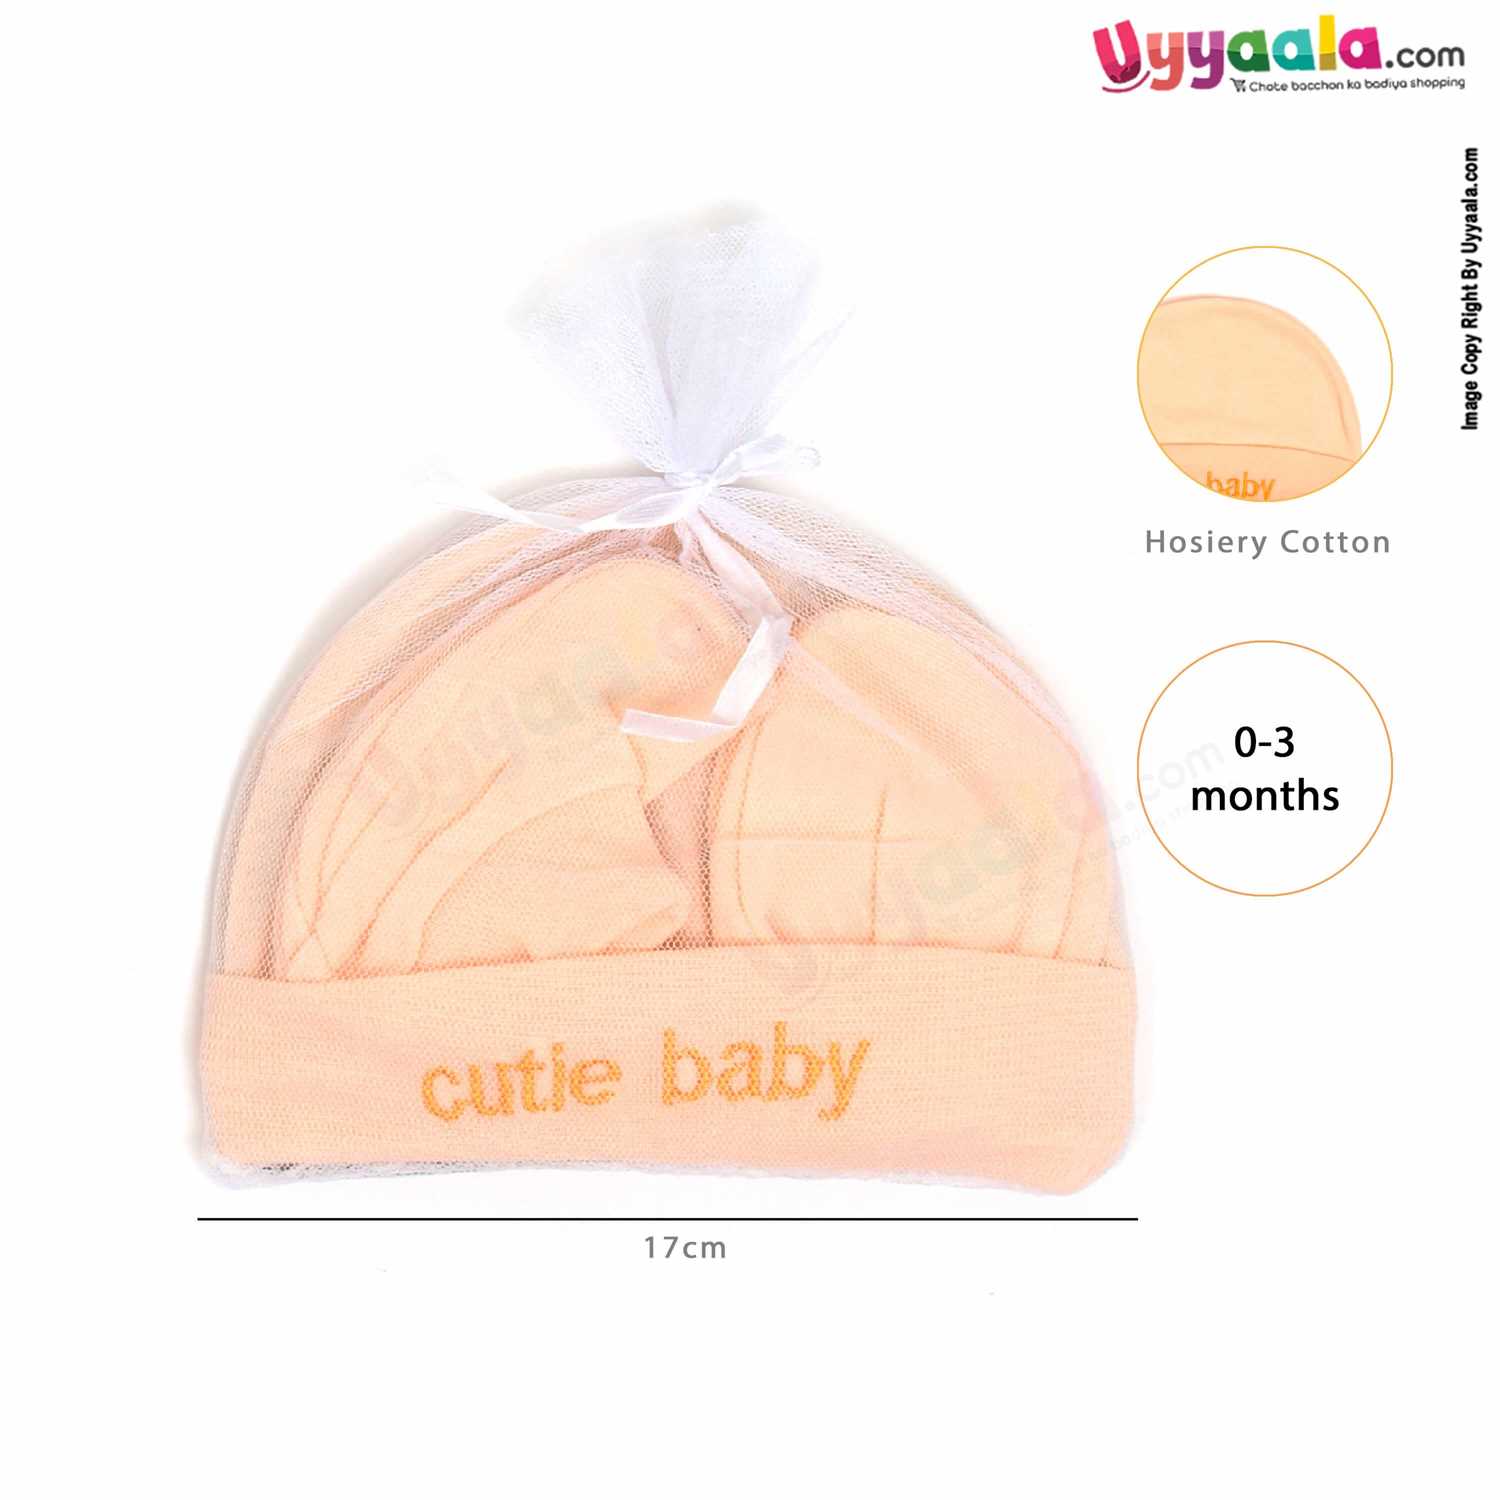 MONTALY Premium Quality Soft Hosiery Cotton Mitten, Booty & Cap Set for Babies Pack of 2 ,0-3m Age- Pink & Orange